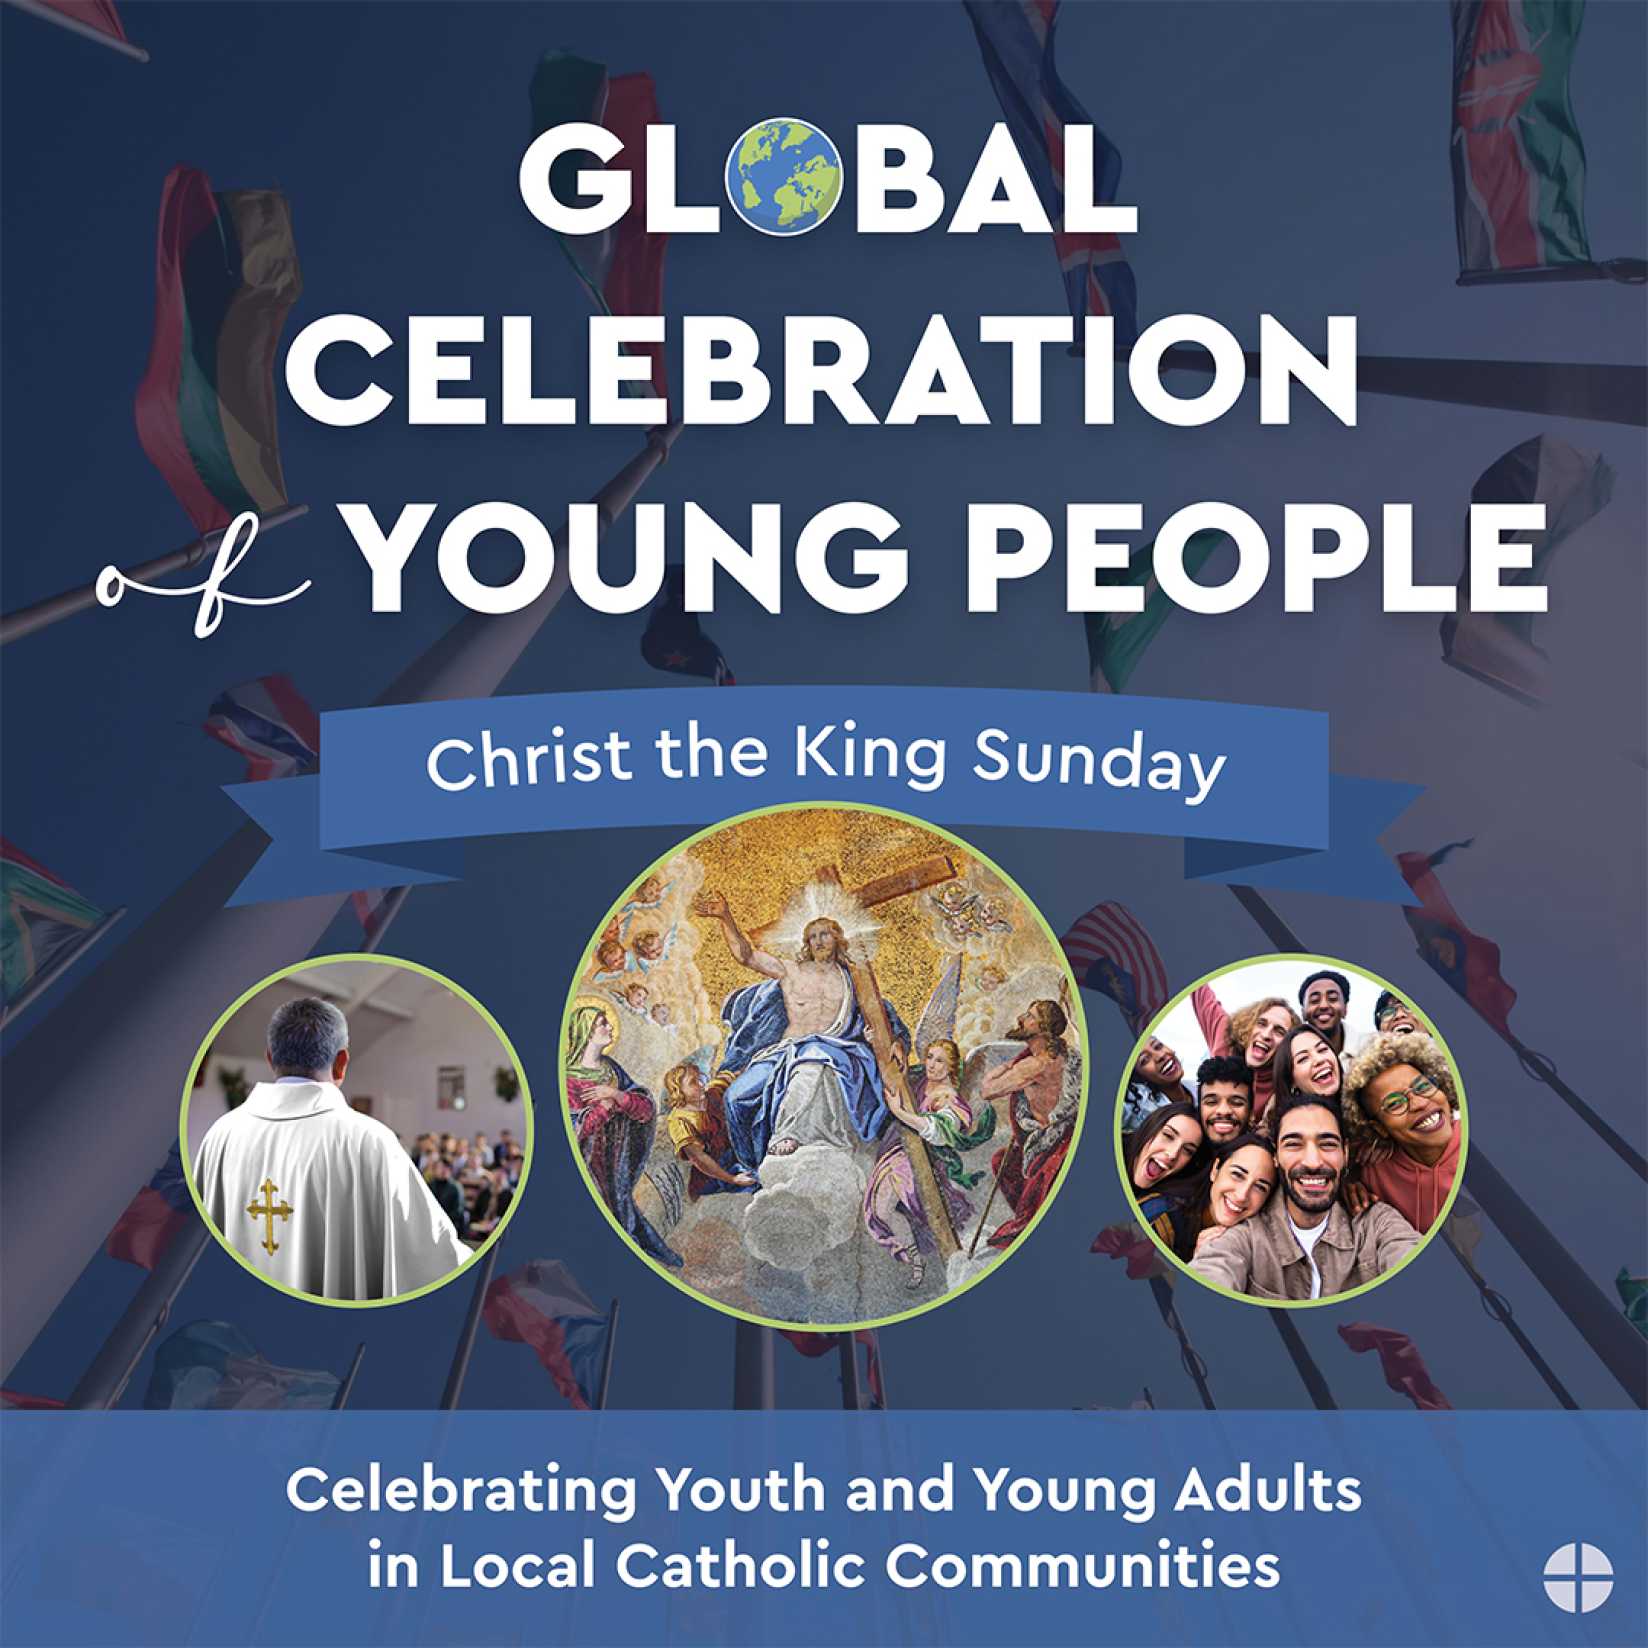 Global Celebration of Young People Christ the King Sunday